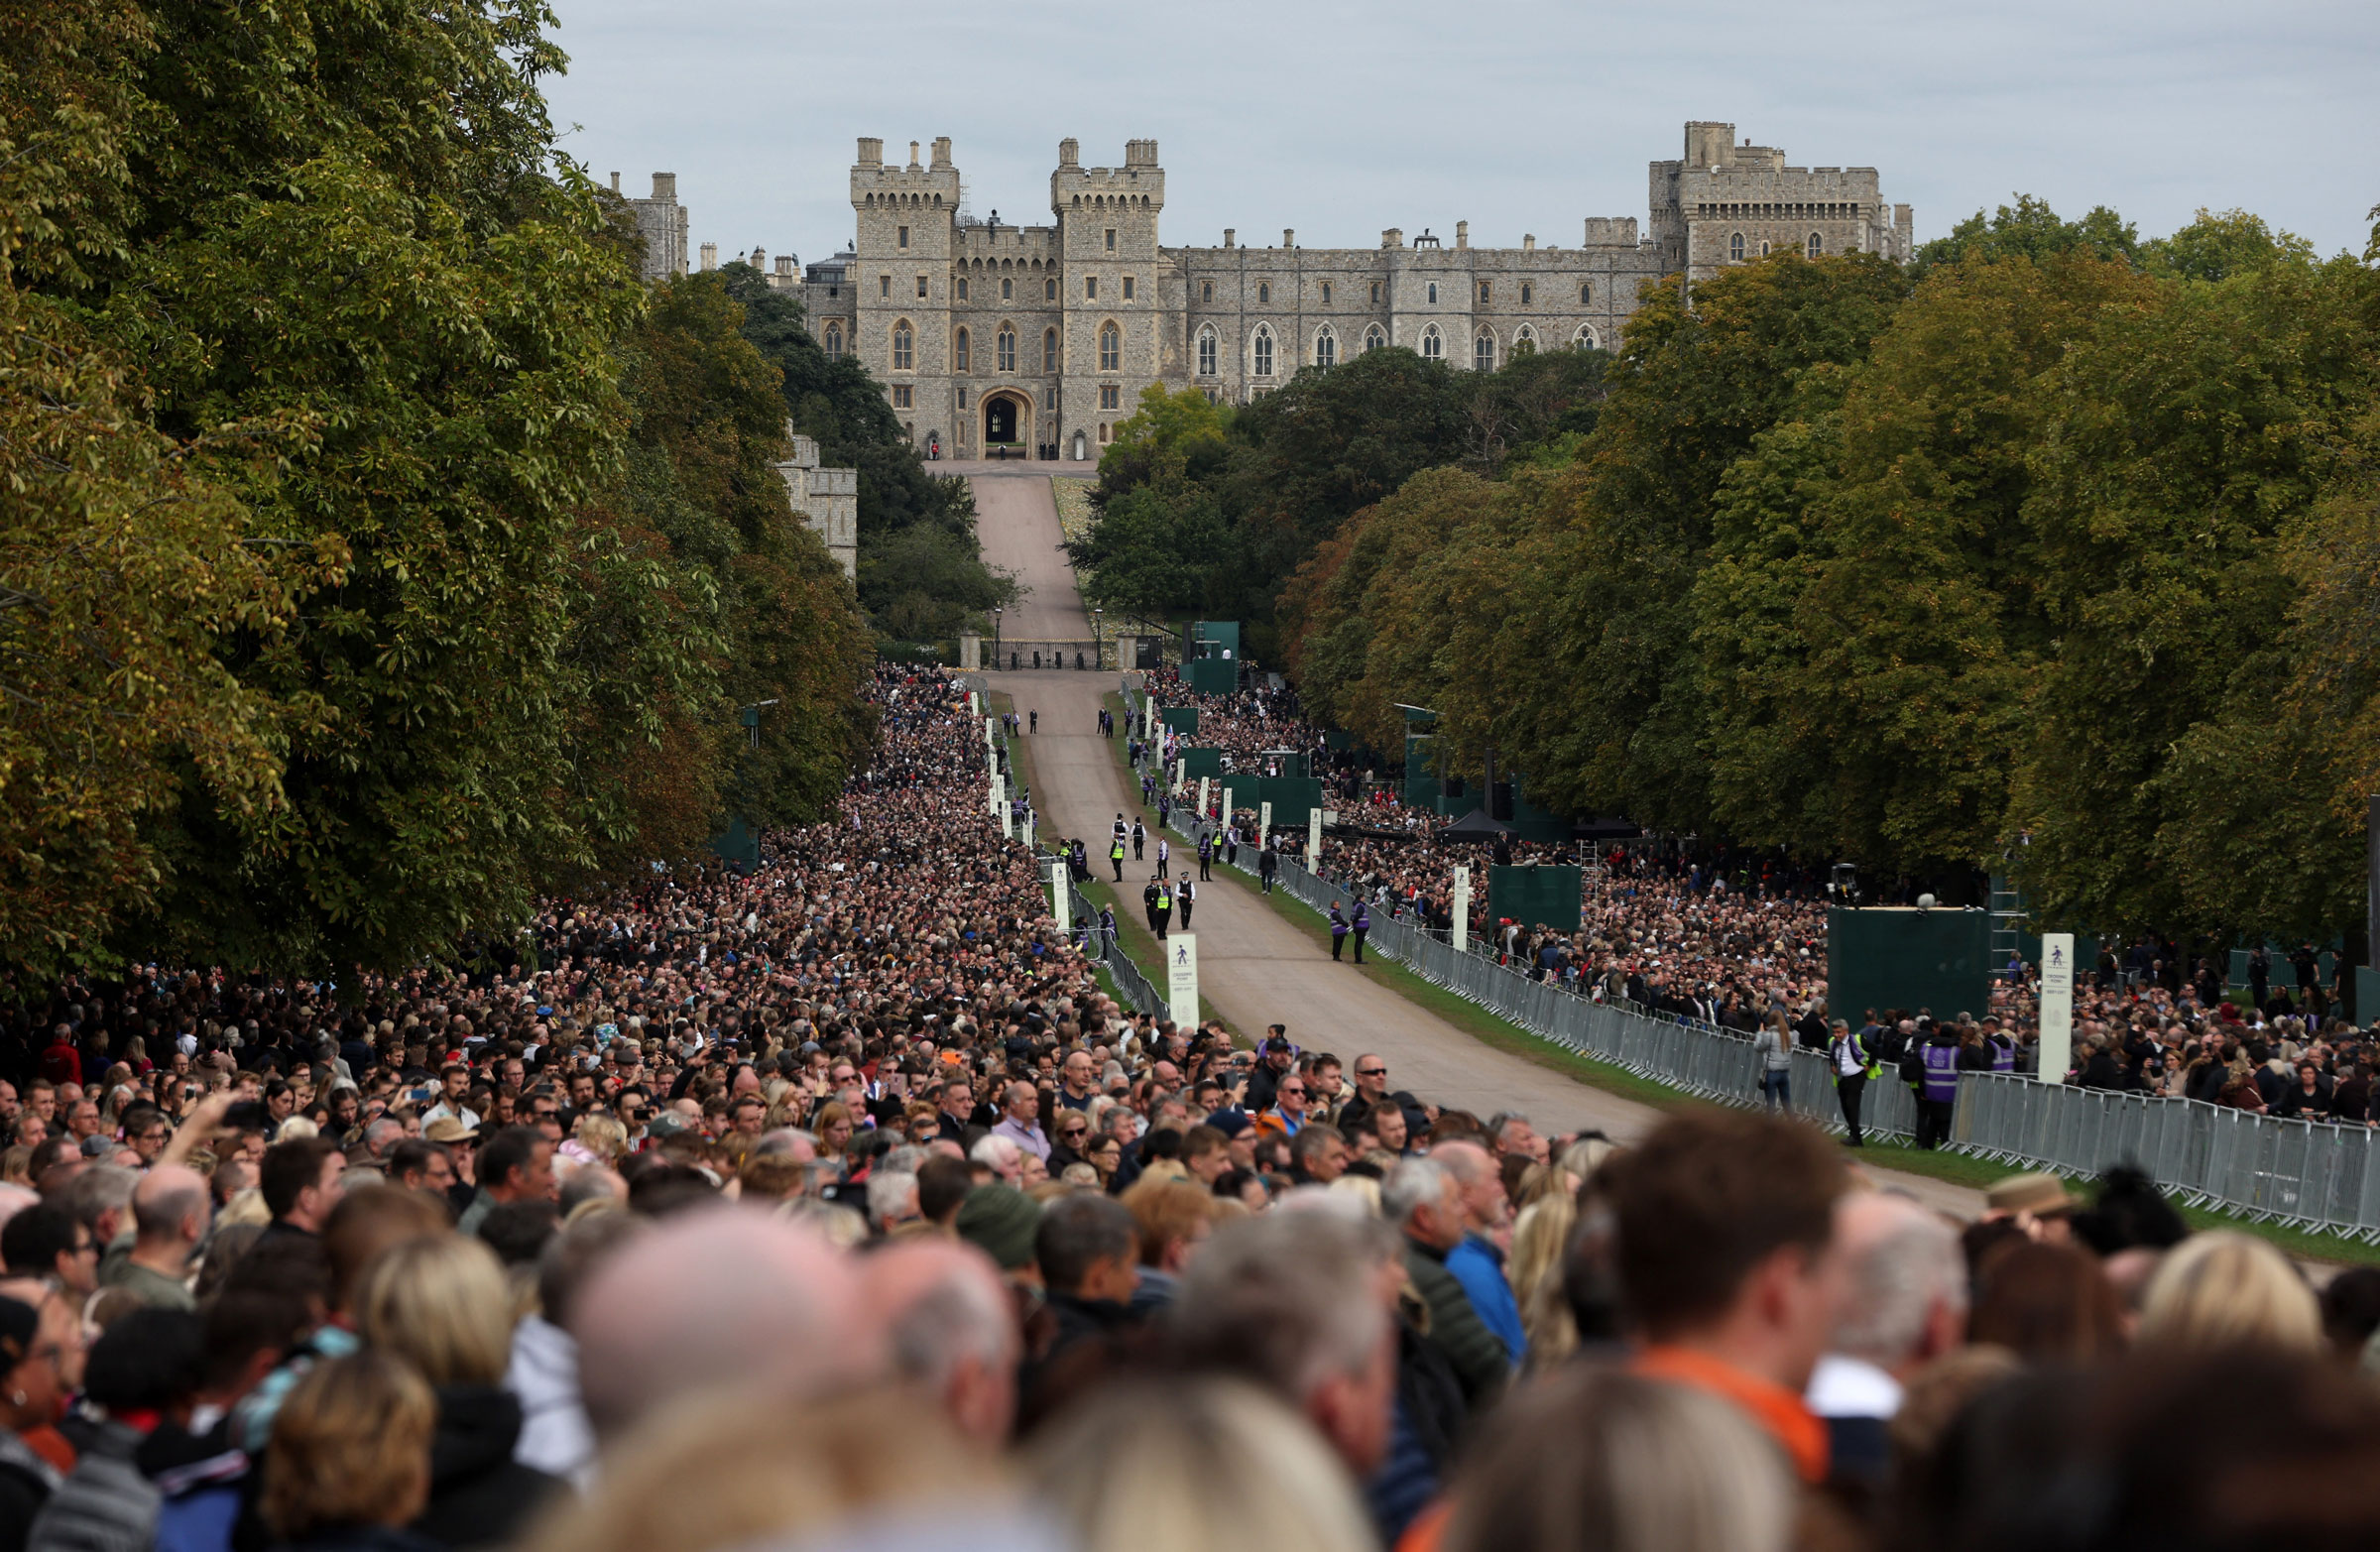 Spectators seen on the Long Walk with Windsor Castle in the background. (Paul Childs—Reuters)